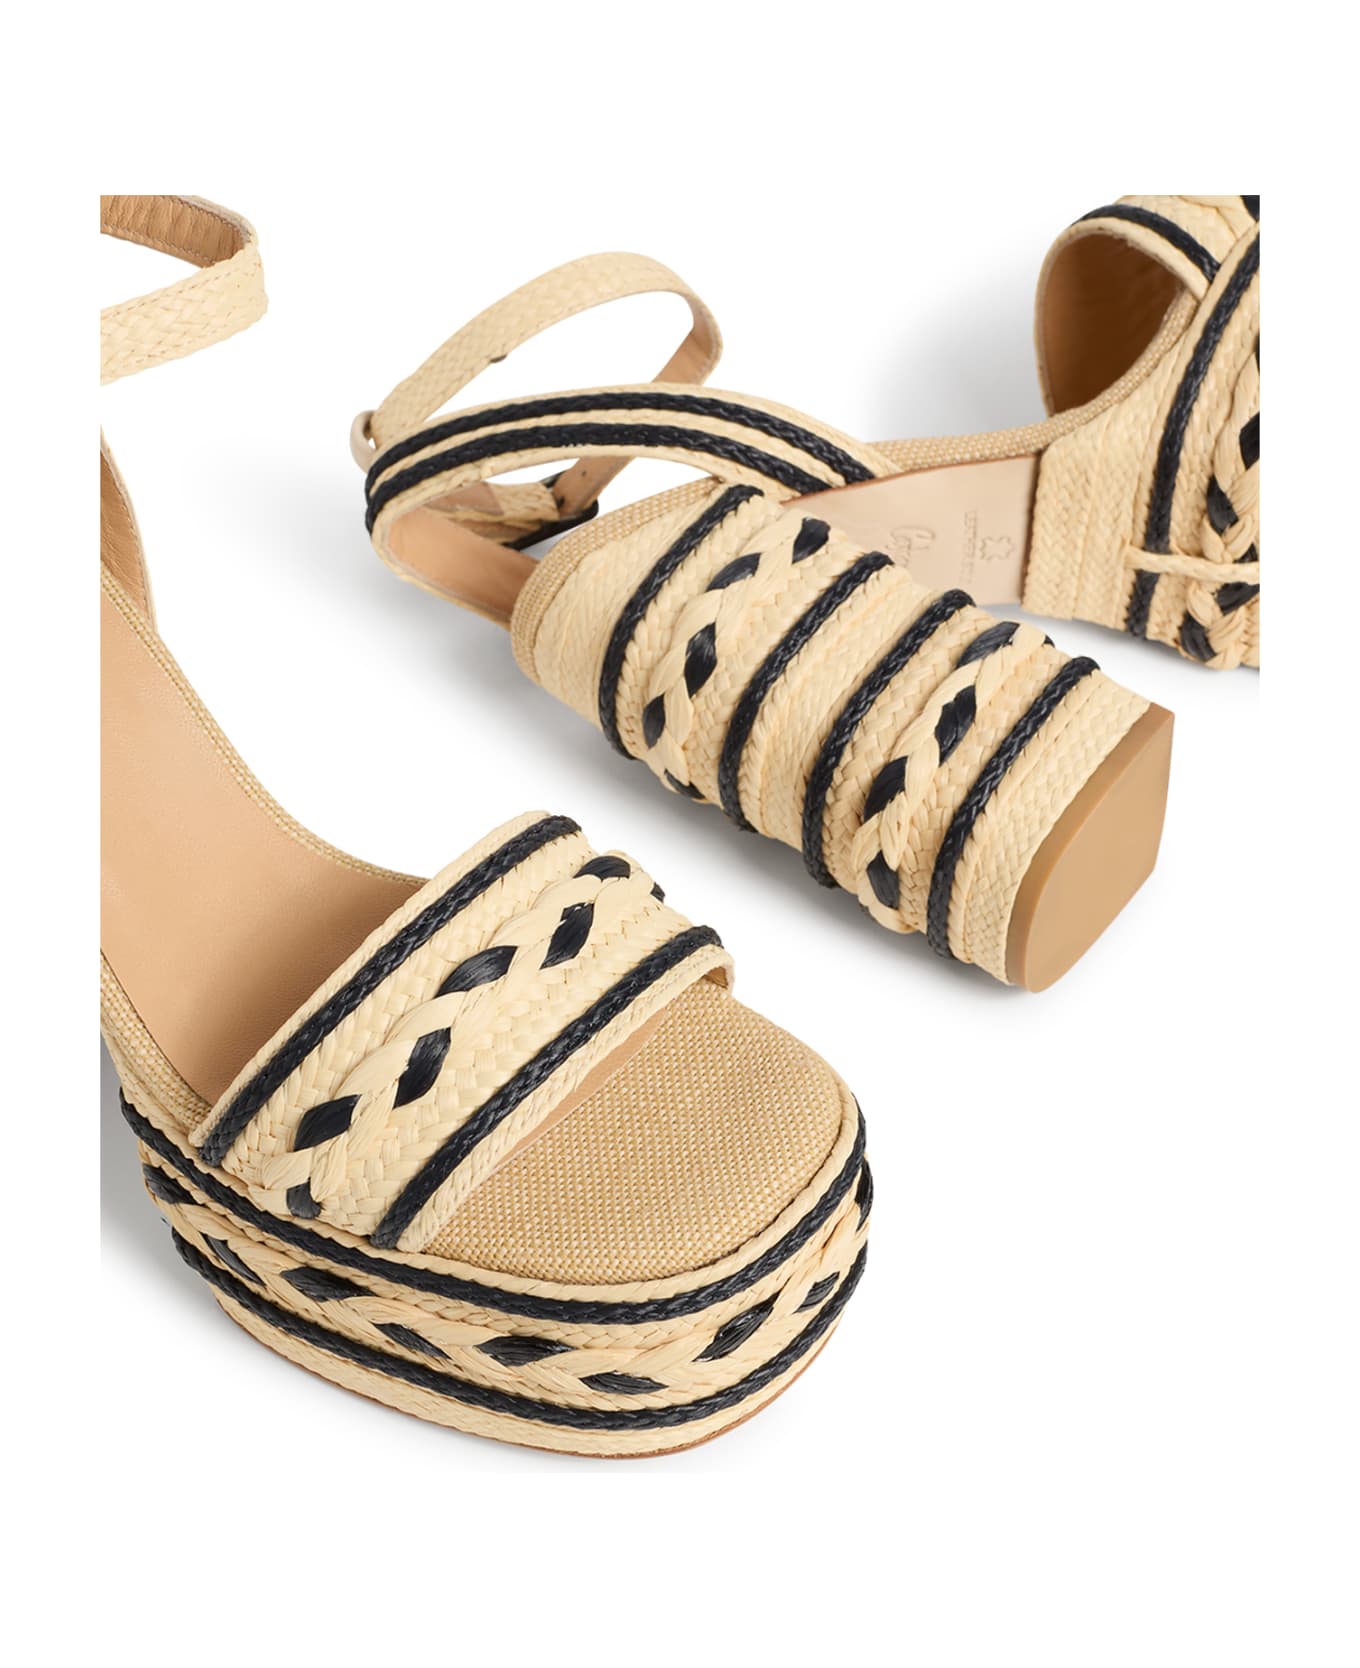 Castañer Two-tone Flash Sandals With Strap - NATURAL サンダル